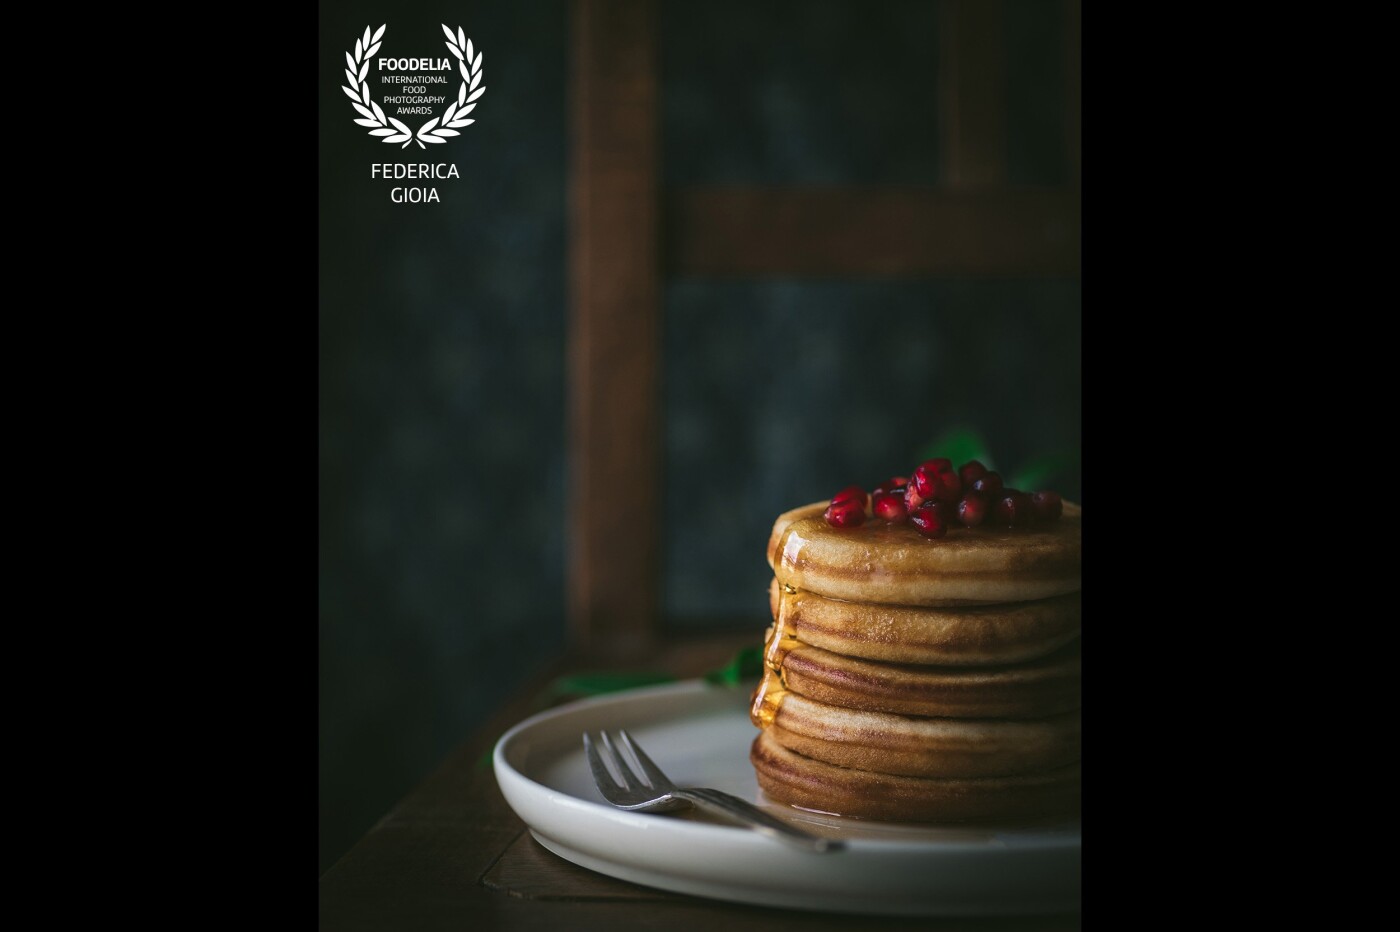 Pancakes are some of my favorite breakfast/meals and I would never get bored of taking photos of them. This stack of pancakes was a personal project and was shot with my 90mm macro Tamron lens, definitely a must in my culinary photography equipment.<br />
